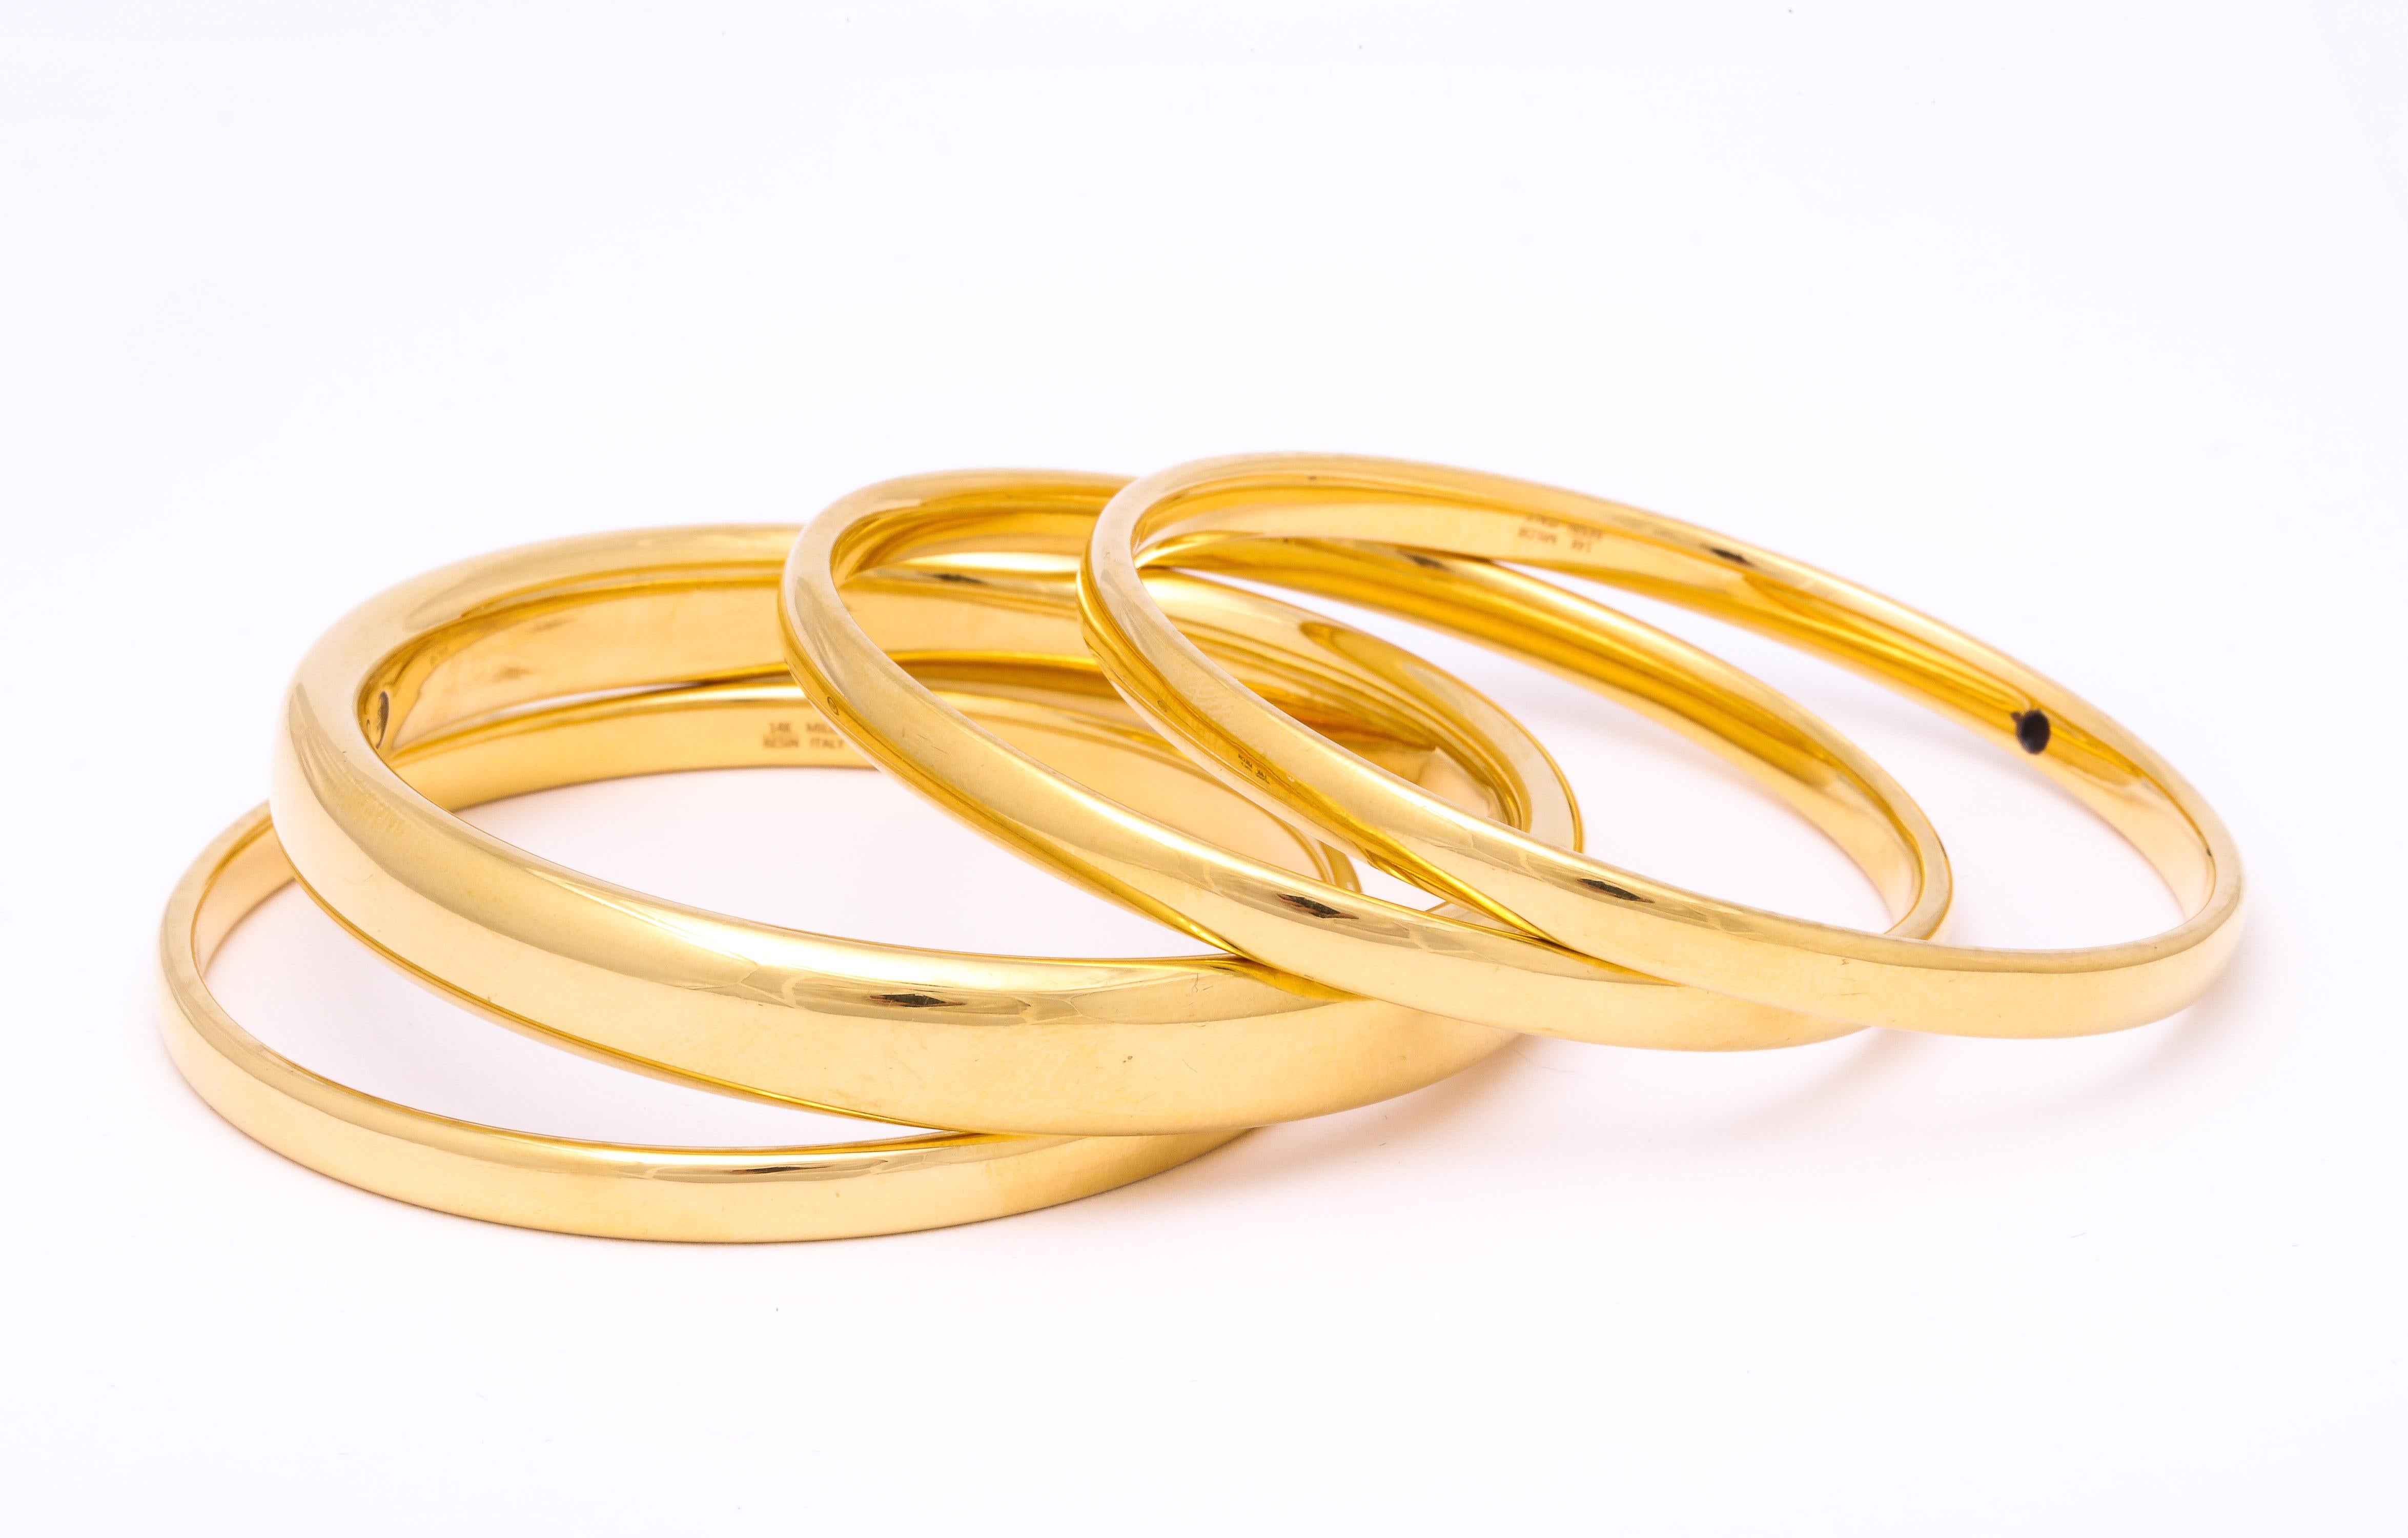 Set Of Four 14kt High Polish Gold Bangles One Large One Approximately .40 of and inch And Other Three Bangles Approximately .25 Of an Inch Wide. Crafted In The 1960's In Italy.Fits Standard Wrist Size.